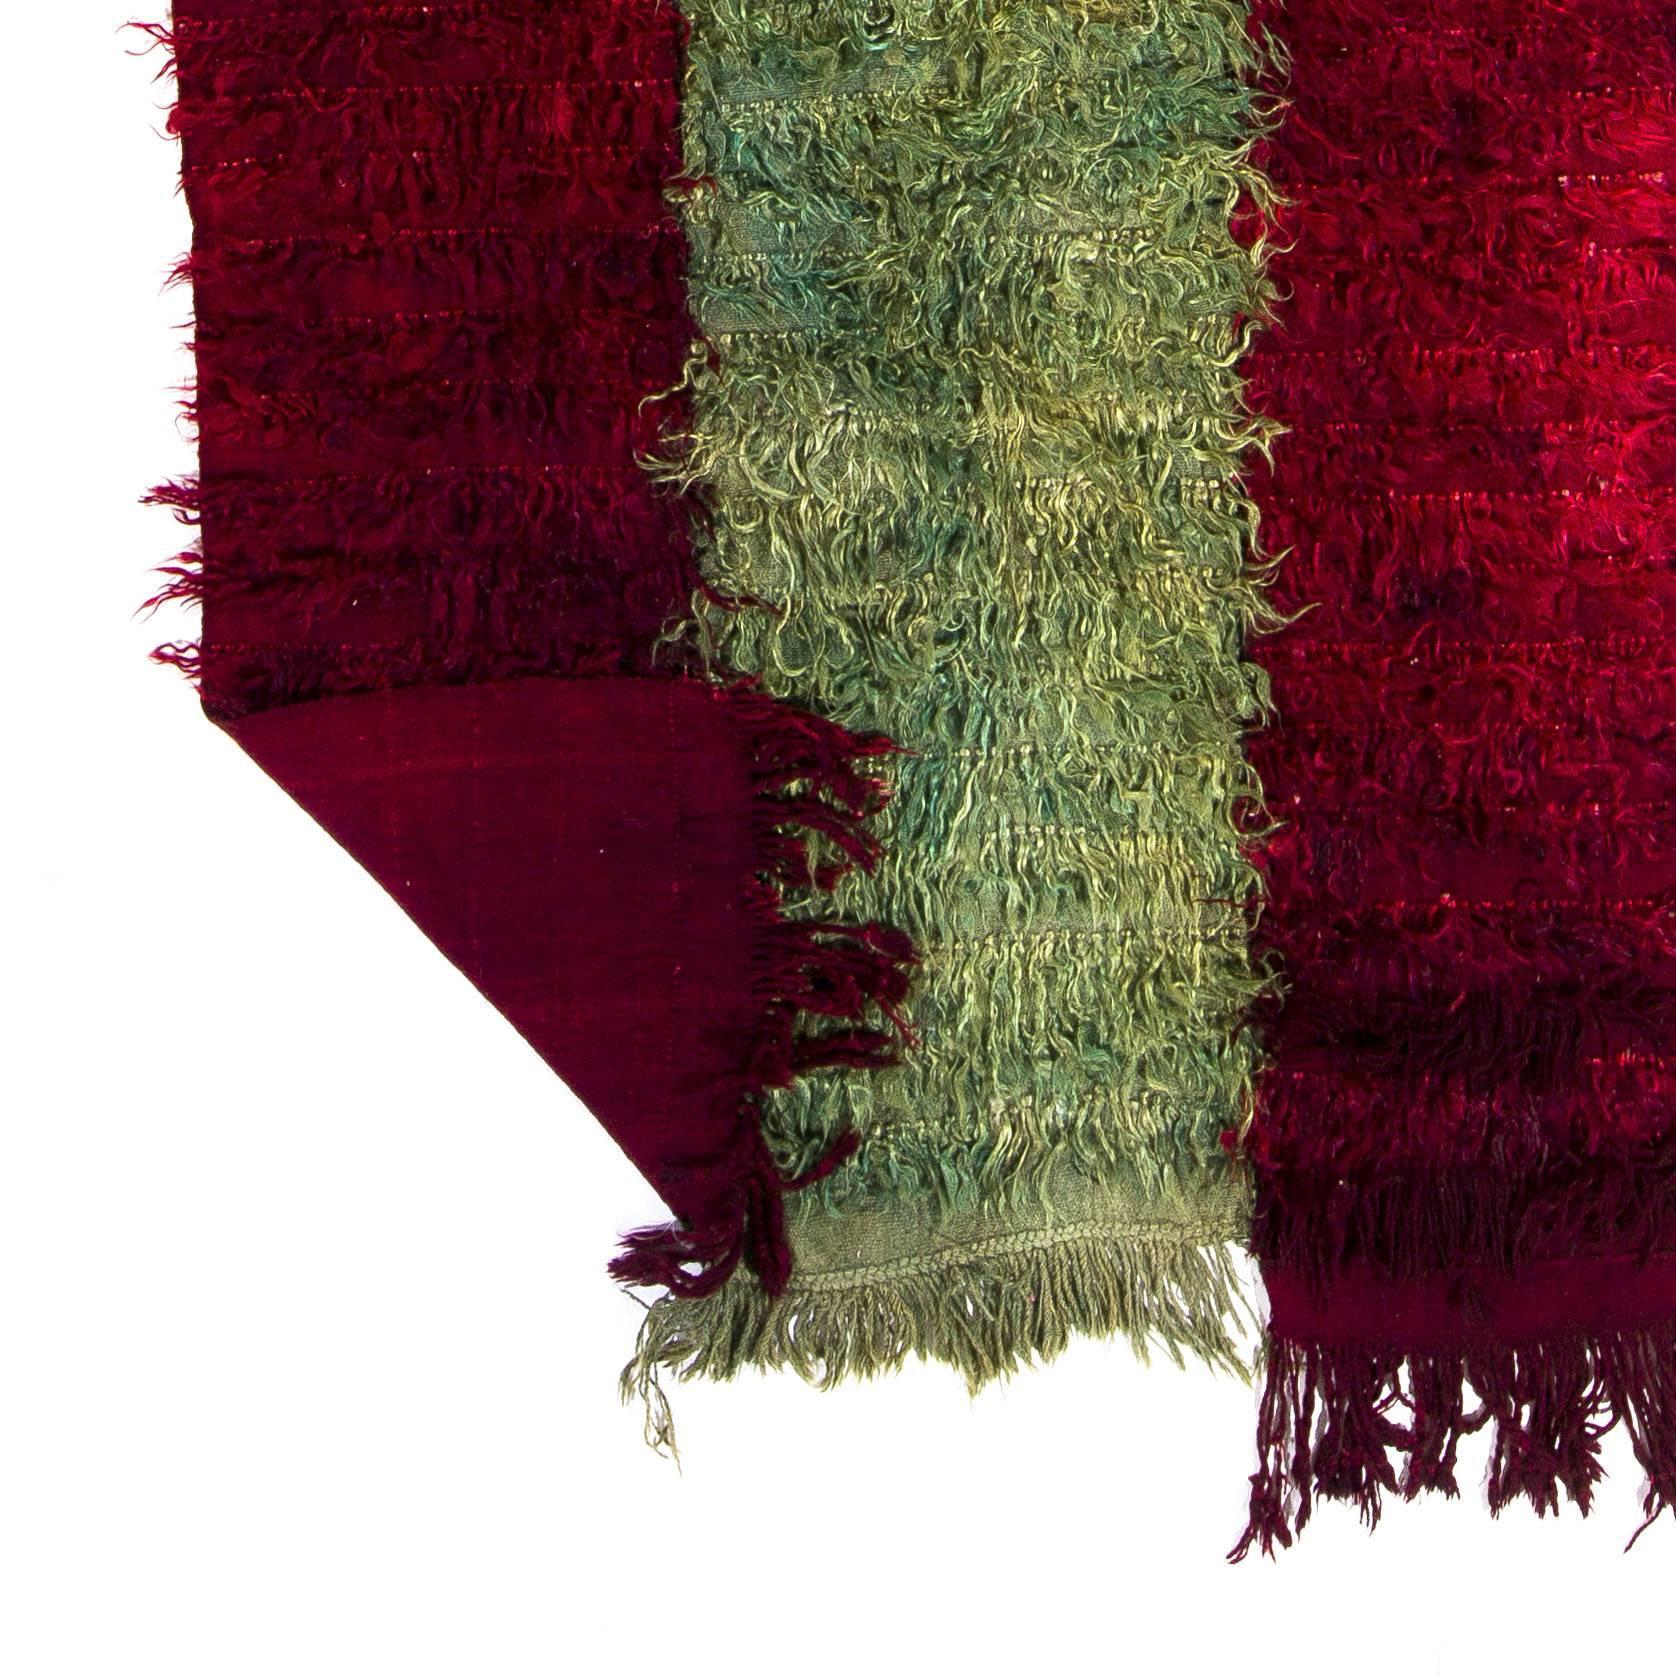 Hand-Woven 4.7x11.2 Ft Vintage Filikli Tulu Rug Made of Mohair Wool, Red and Green Colors For Sale